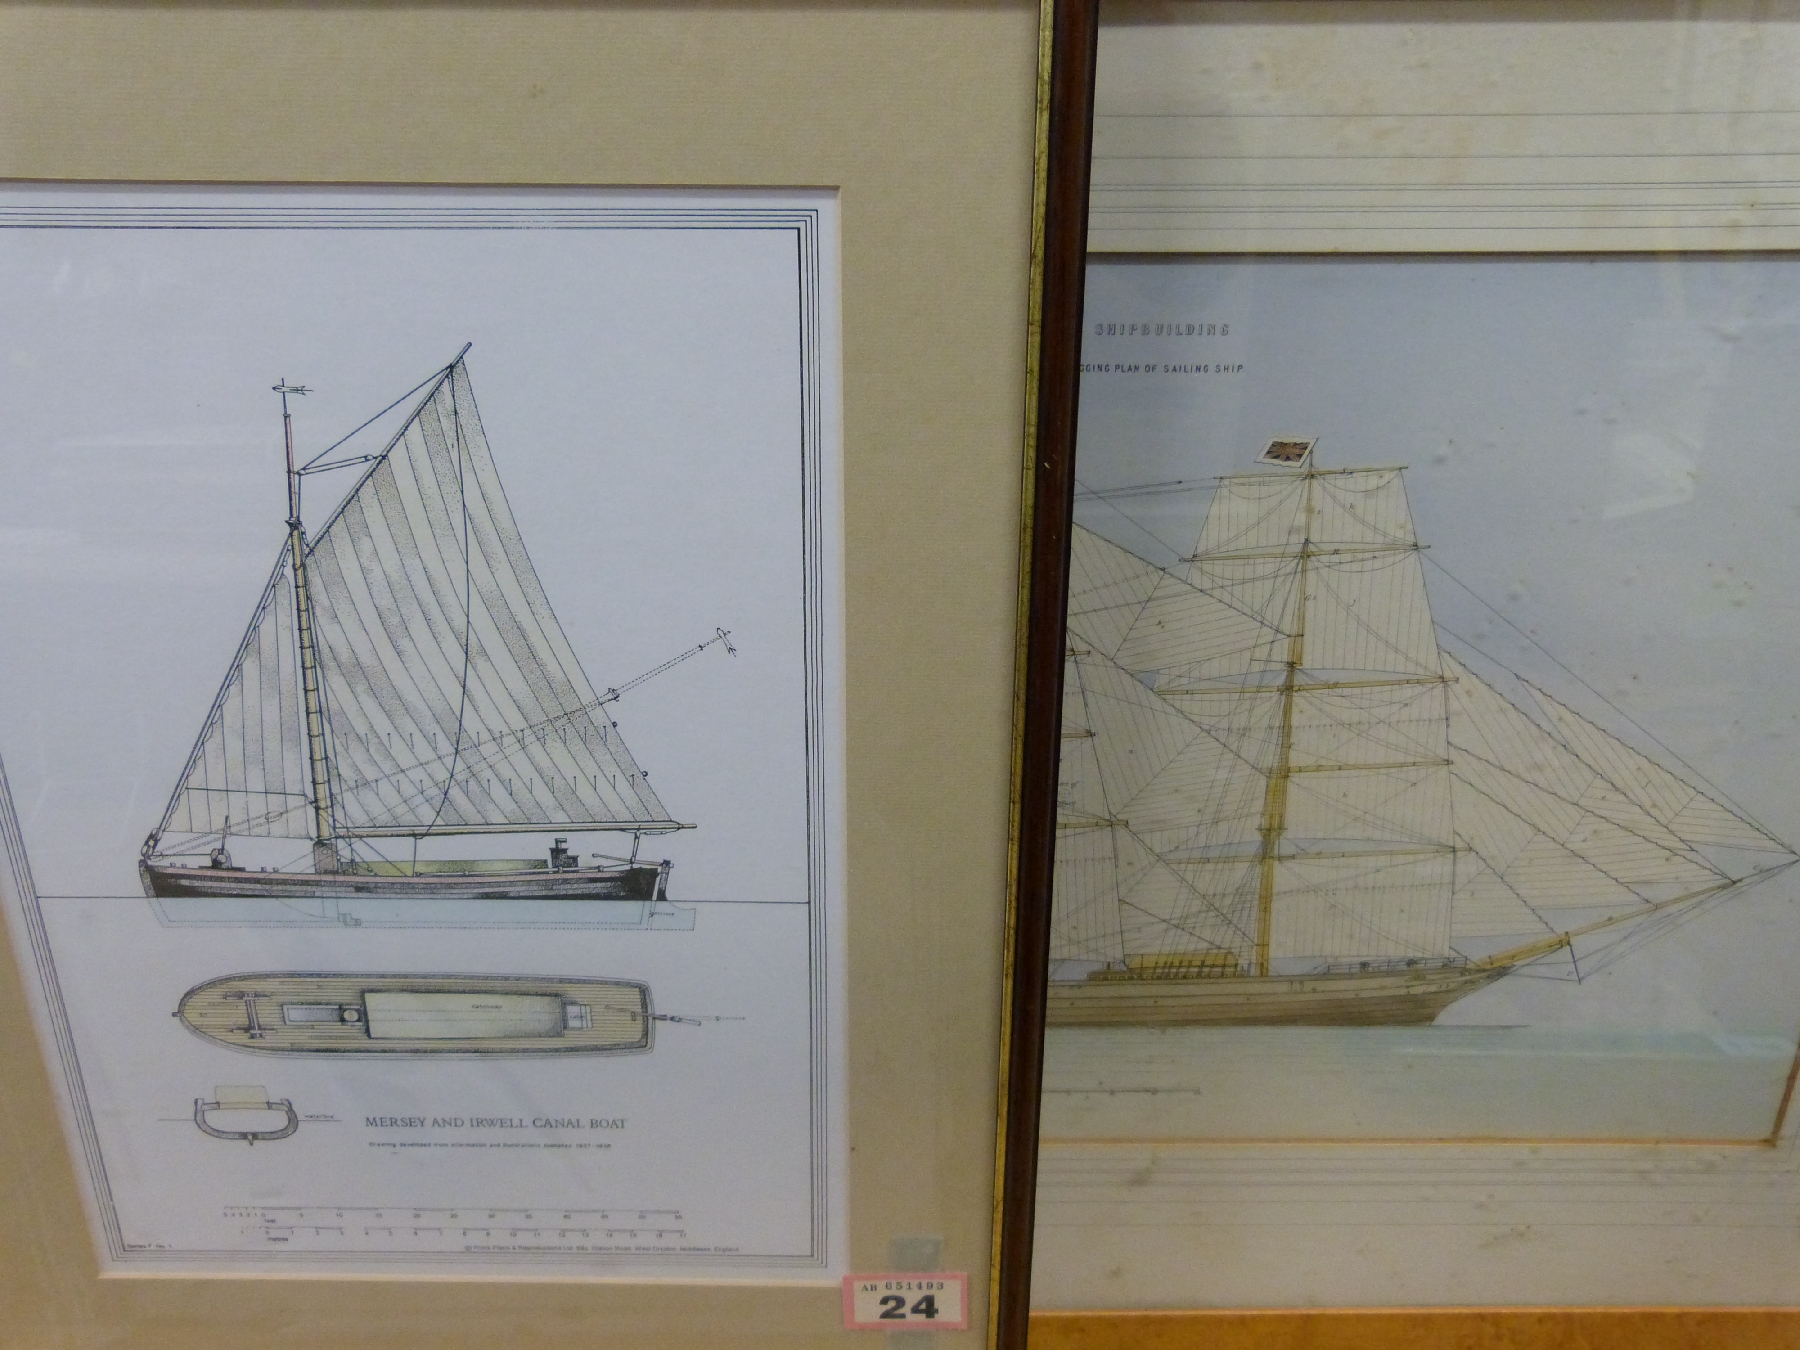 A print of a Mersey and Irwell canal boat, framed rigging plan of a sailing ship, - Image 2 of 4